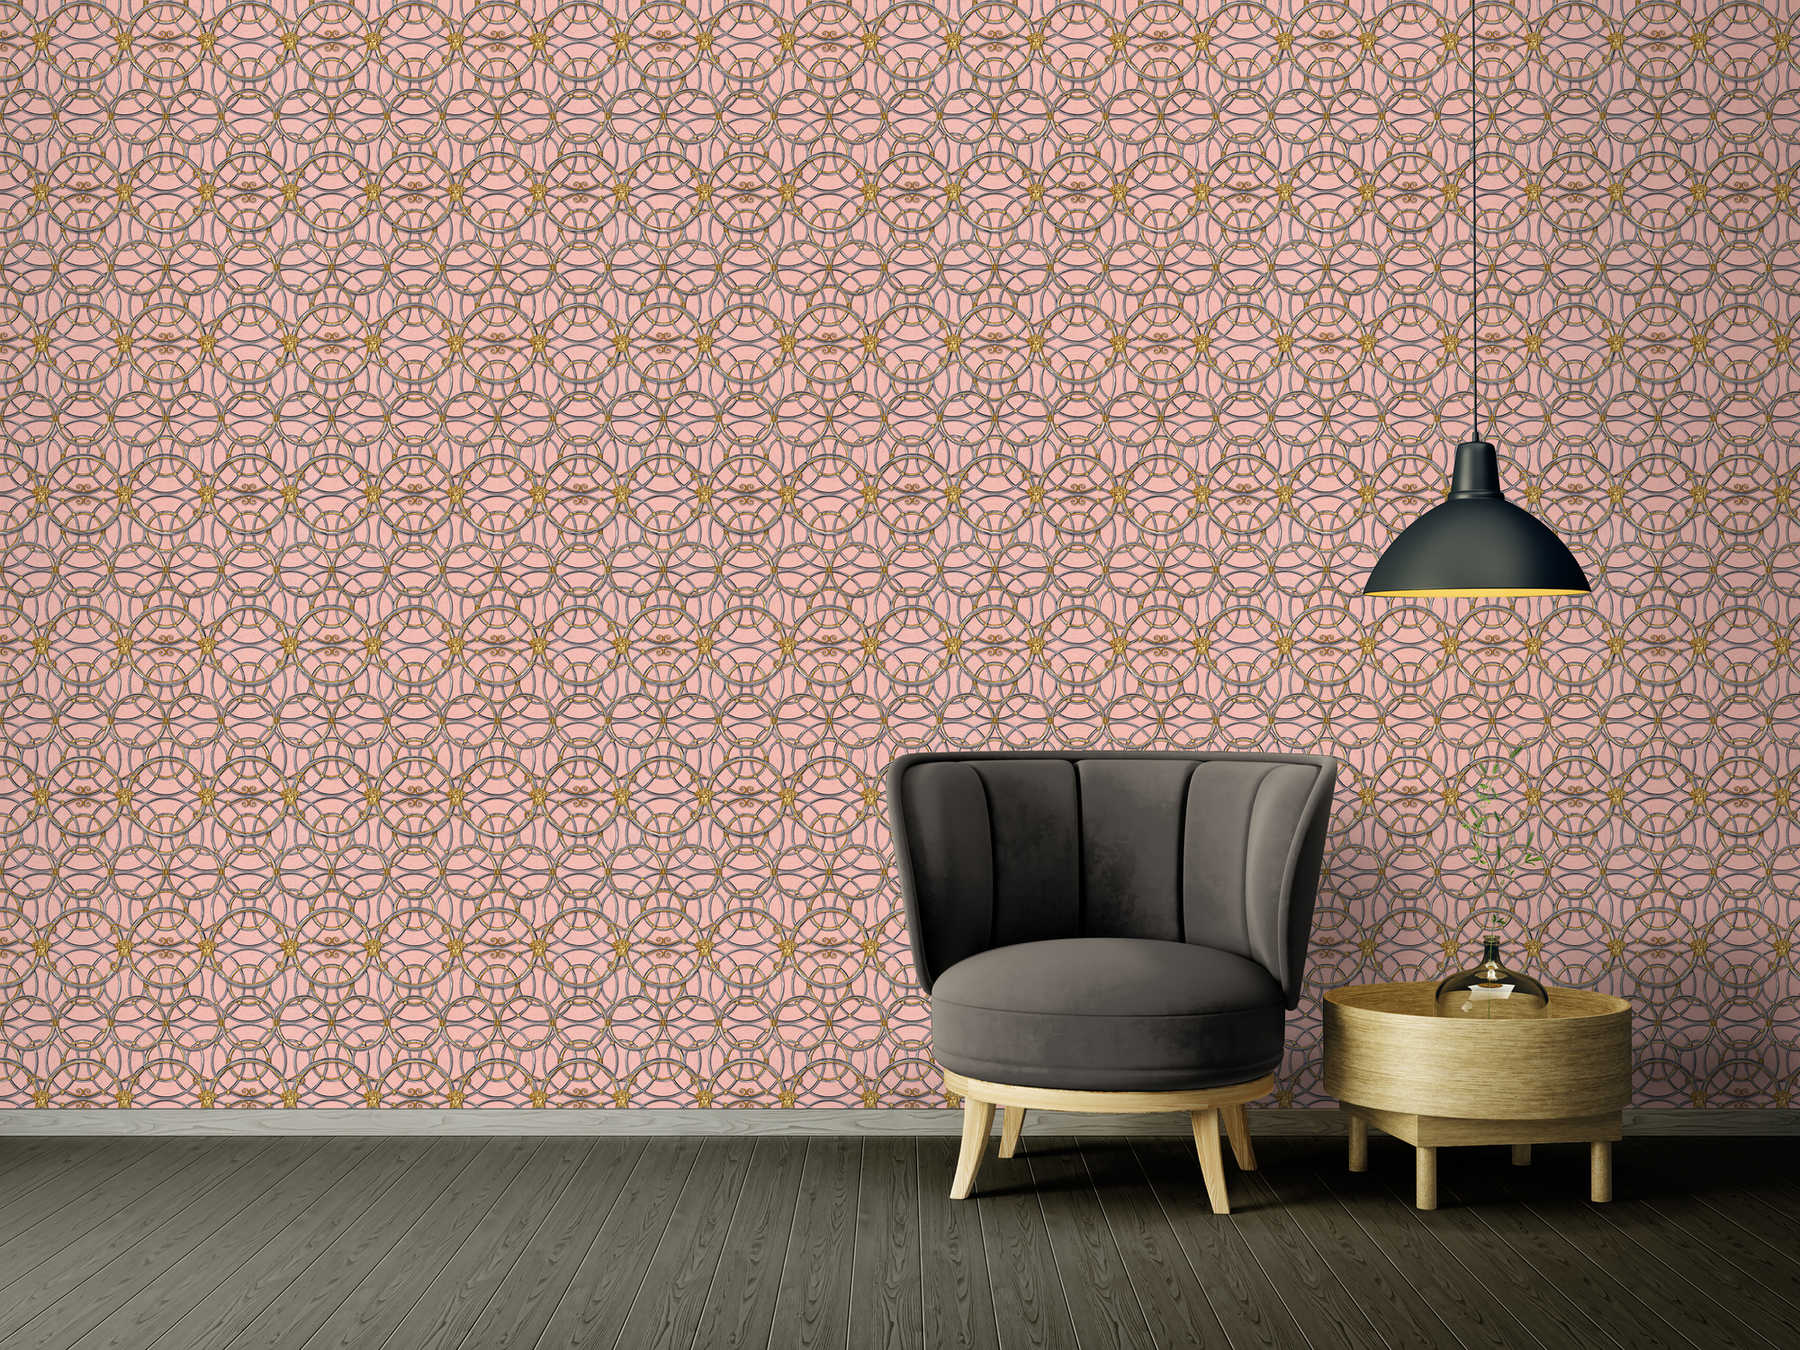             VERSACE Home wallpaper circle pattern and Medusa - silver, gold, pink
        